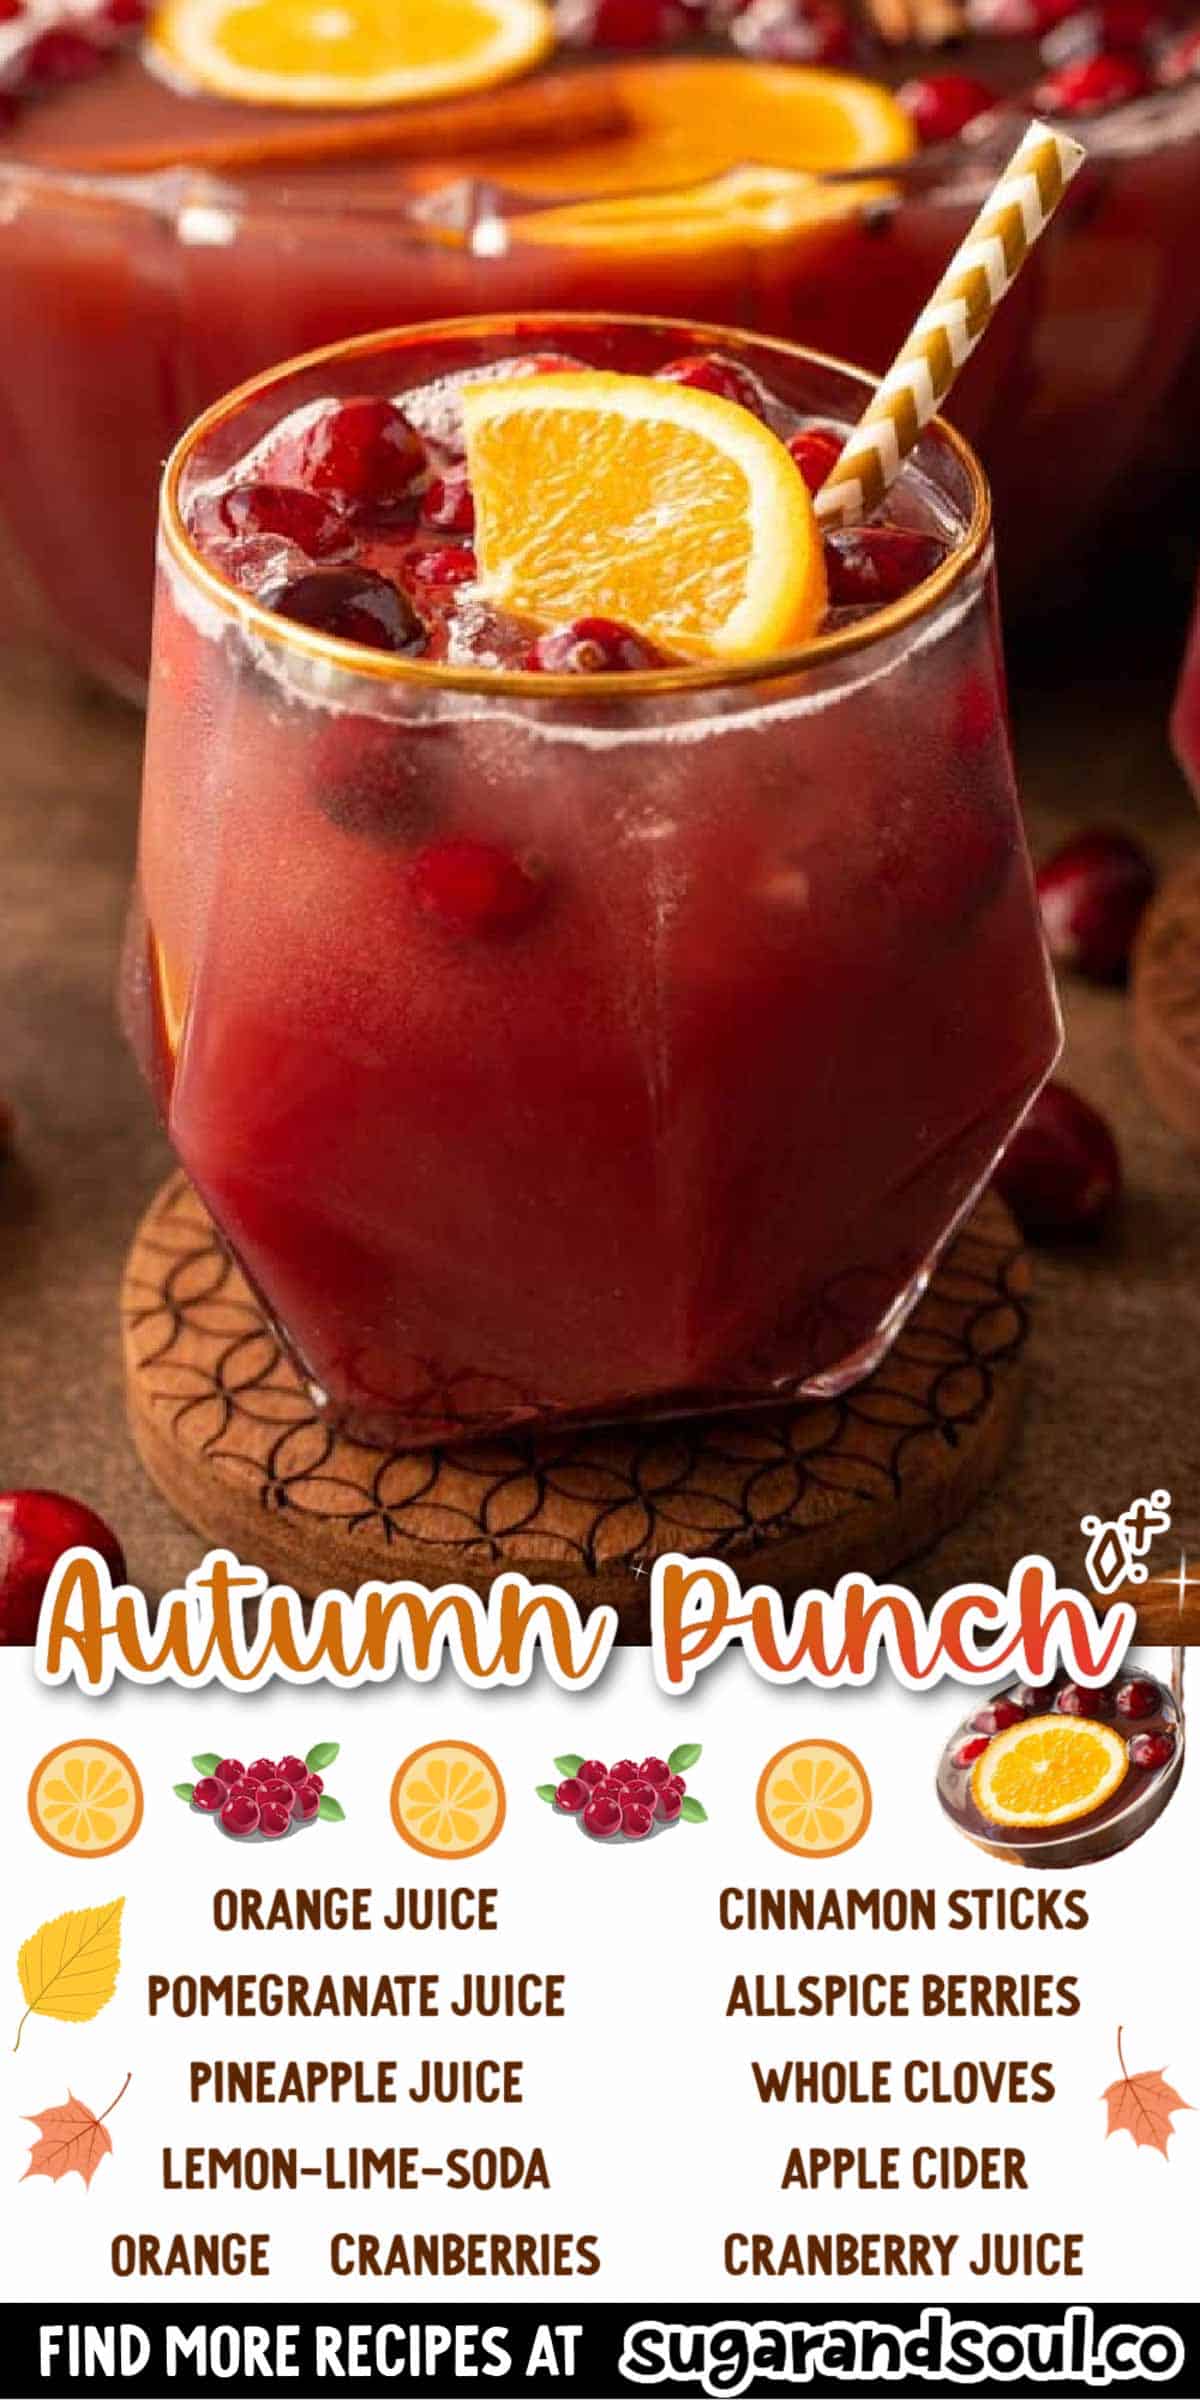 This Autumn Punch is a flavor-packed family-friendly drink that combines 5 different types of juices with spices, and lemon-lime soda! The perfect punch to serve at gatherings and holidays! via @sugarandsoulco